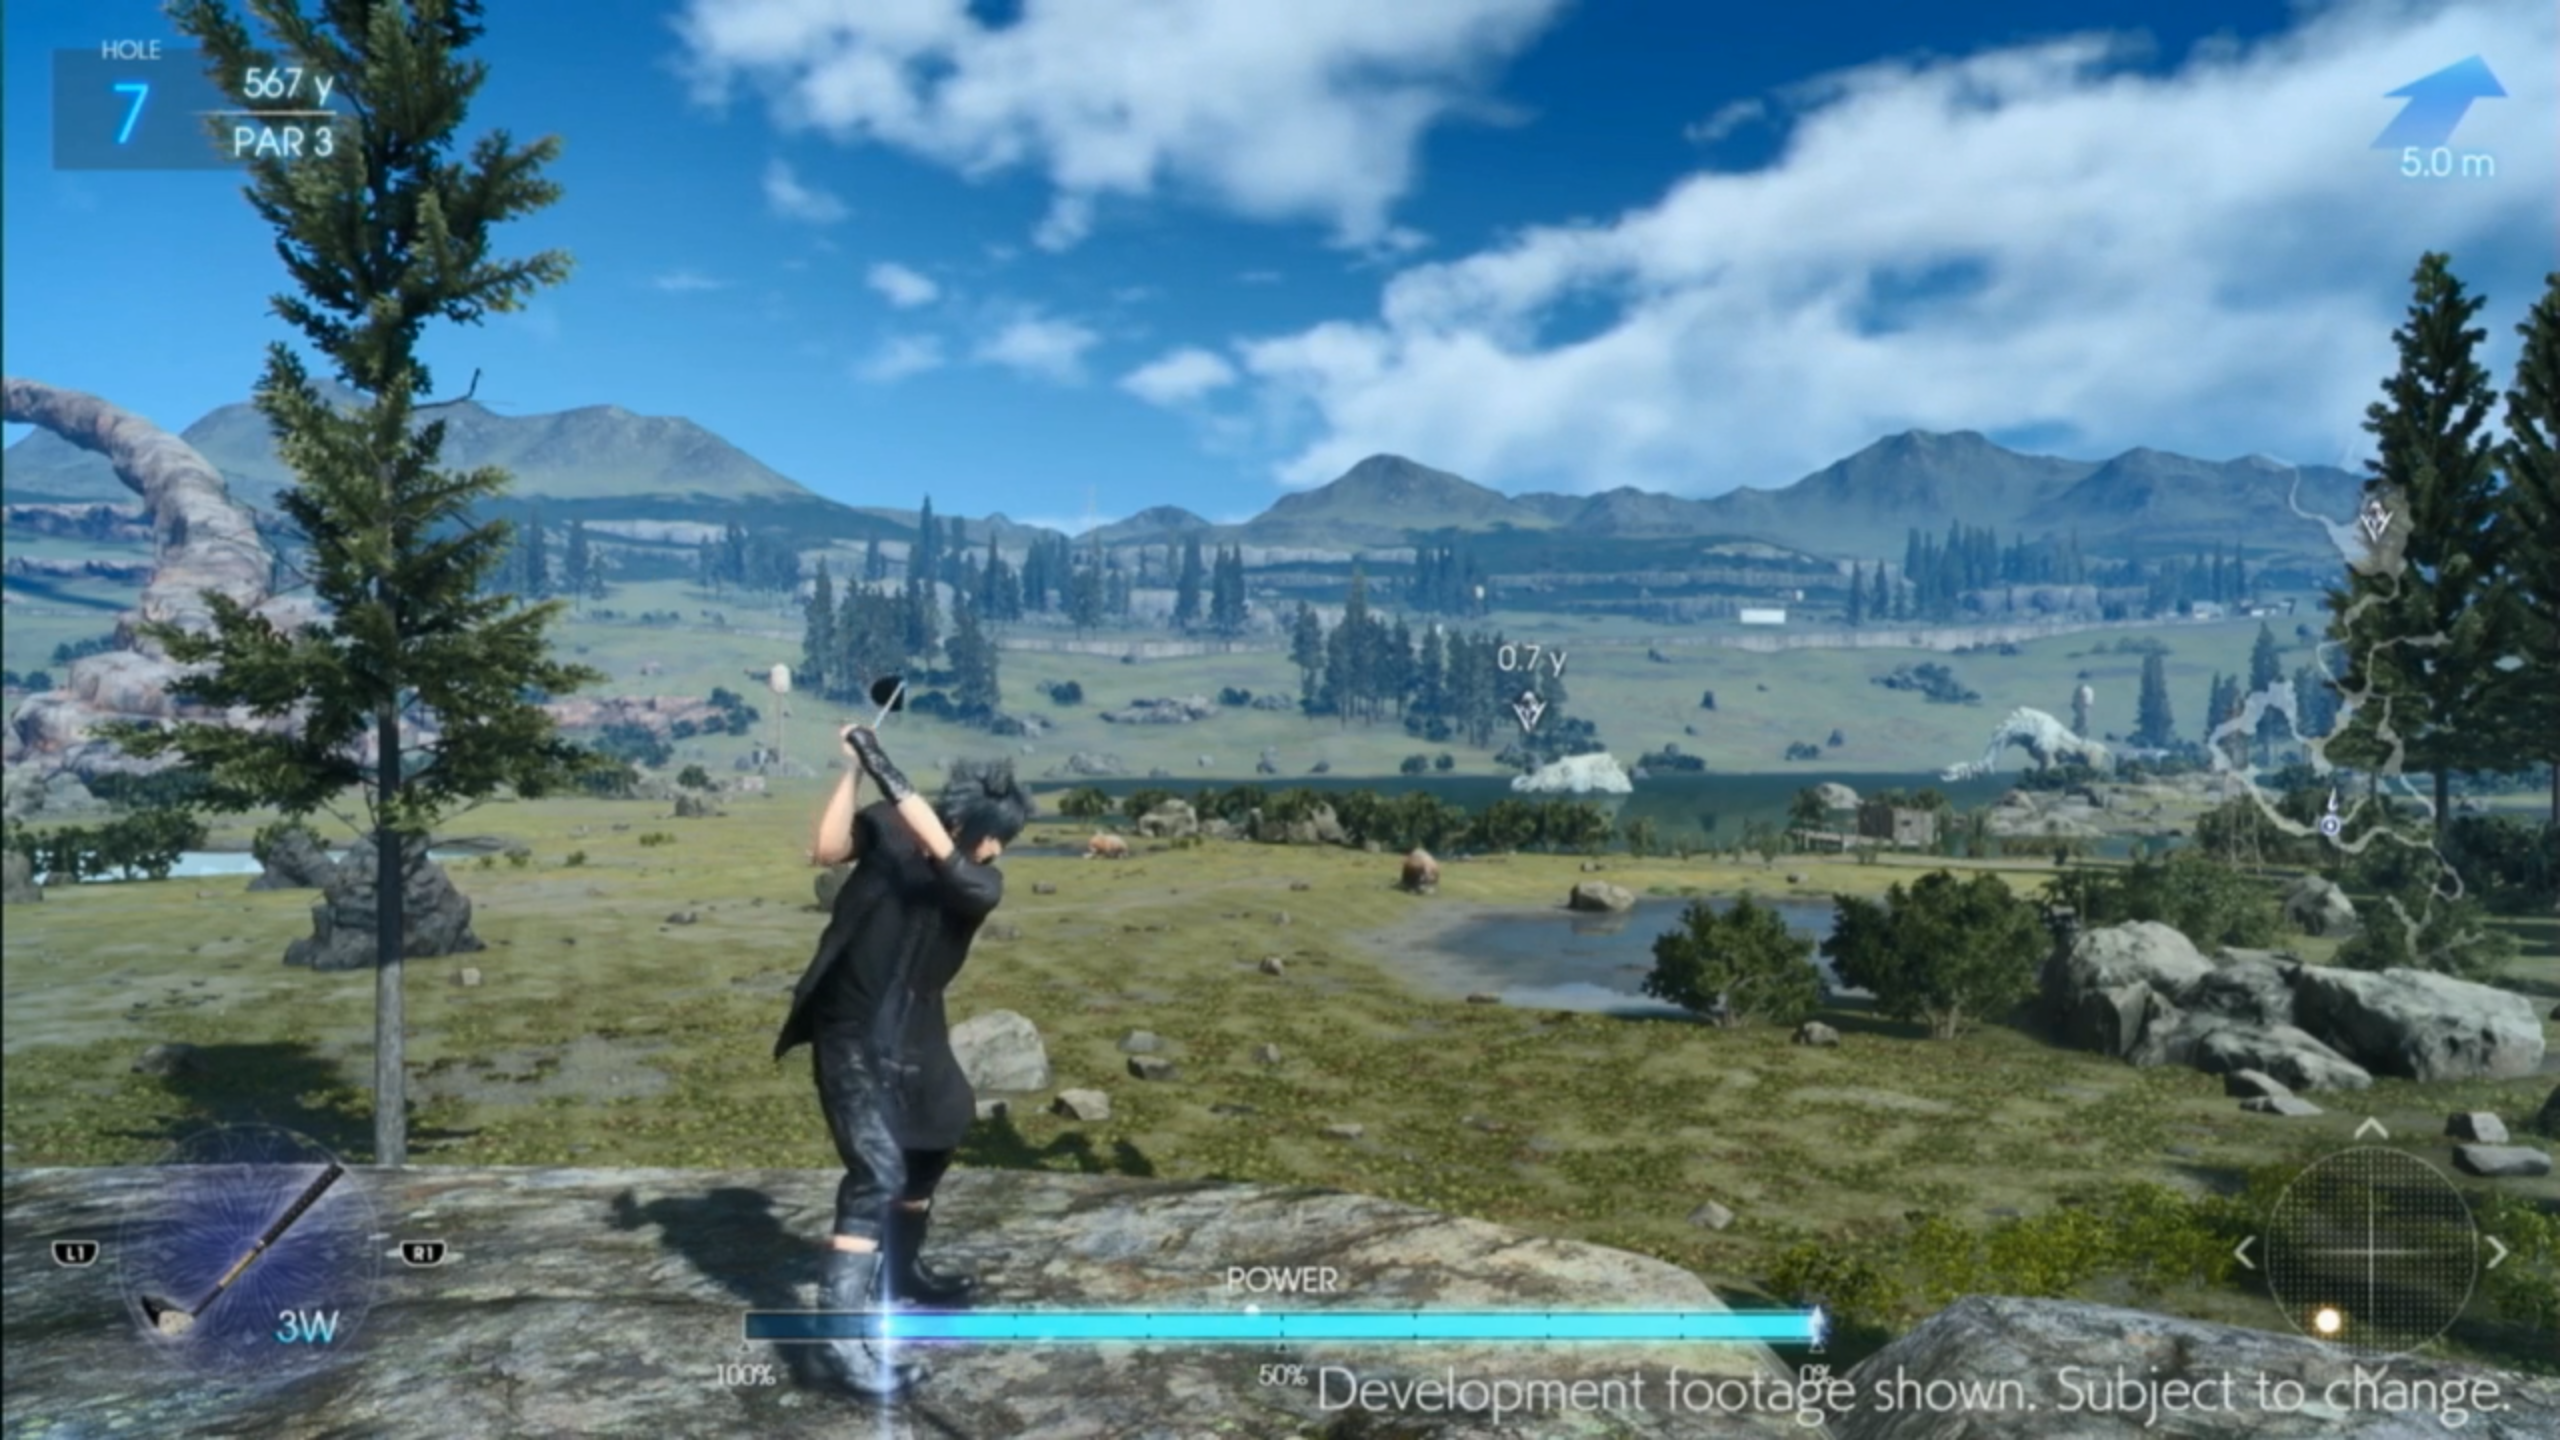 Final Fantasy Xv S Level Editor Mod Support And More For Pc Releasing 18 Nova Crystallis